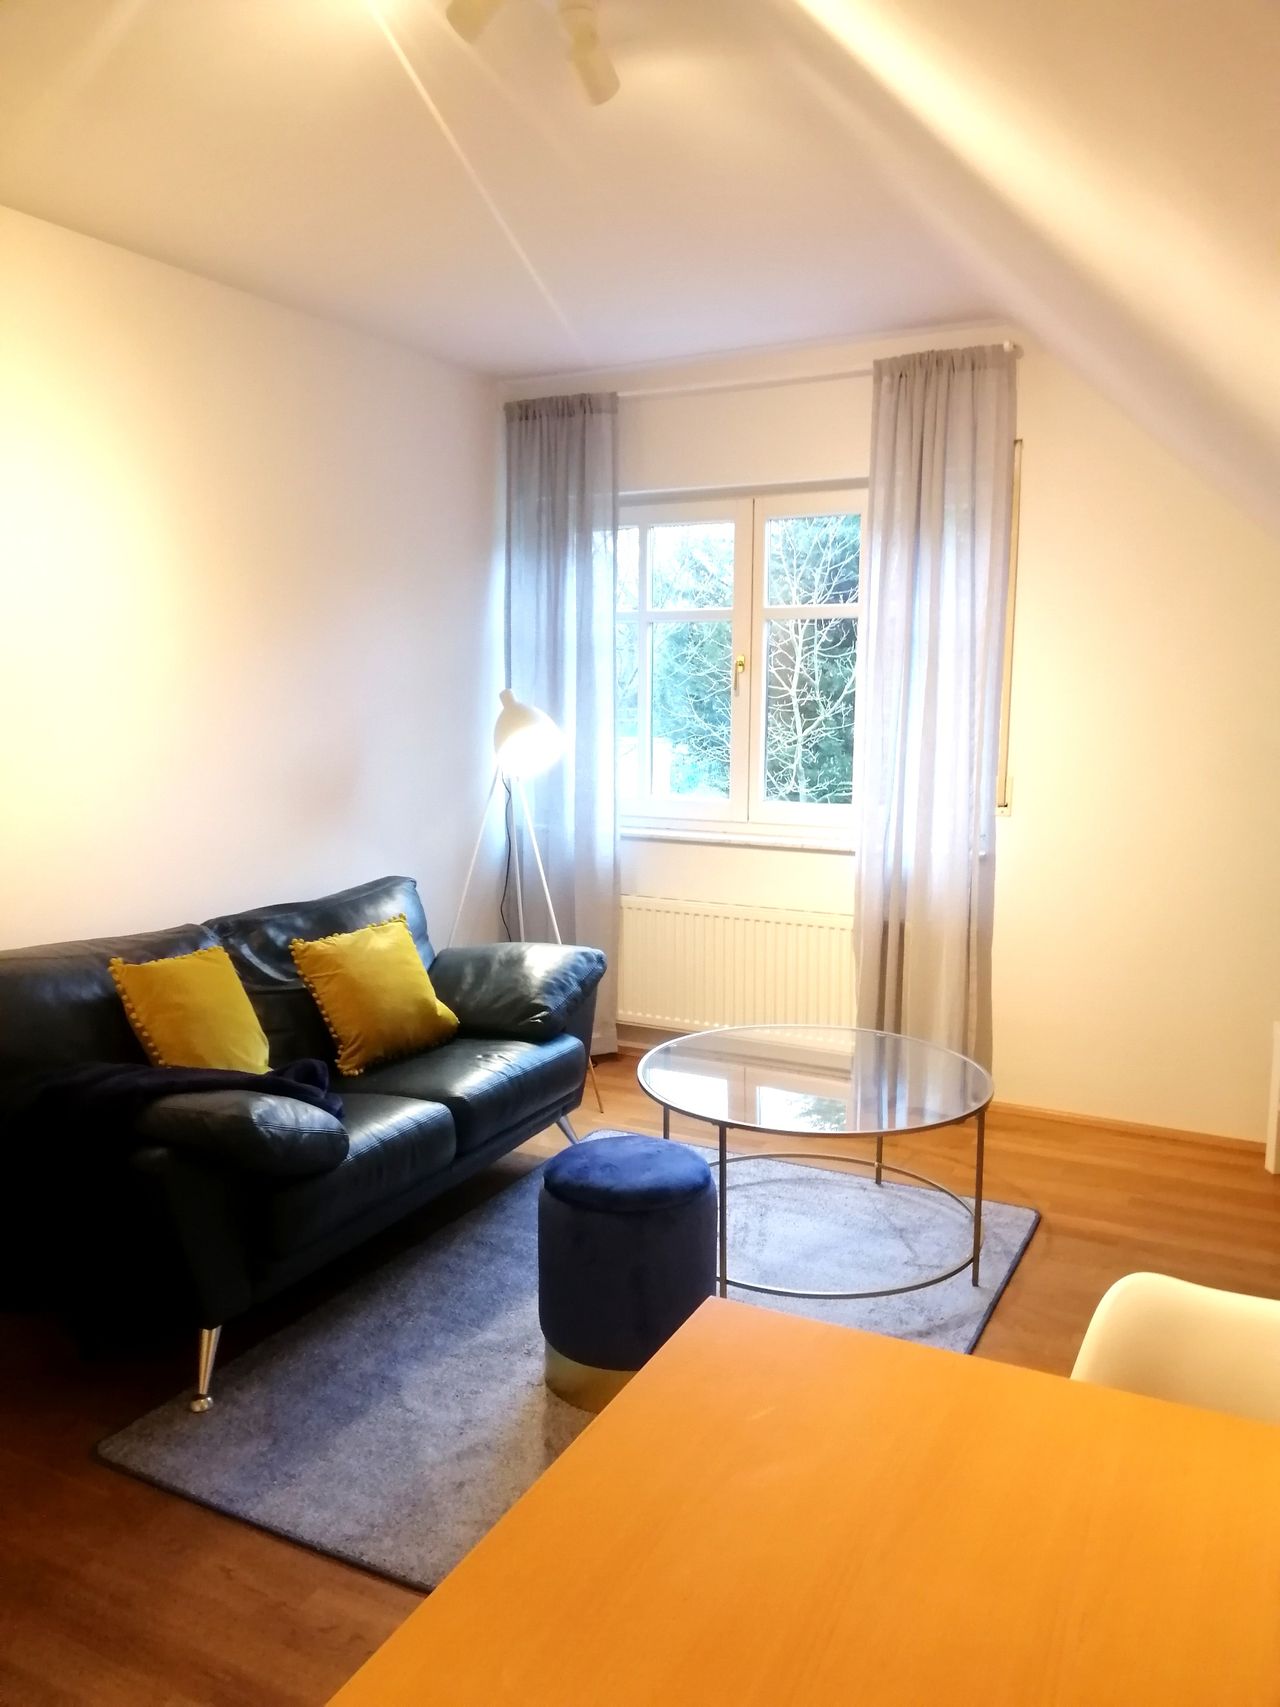 Great furnished and newly renovated apartment with excellent connection to public transportation